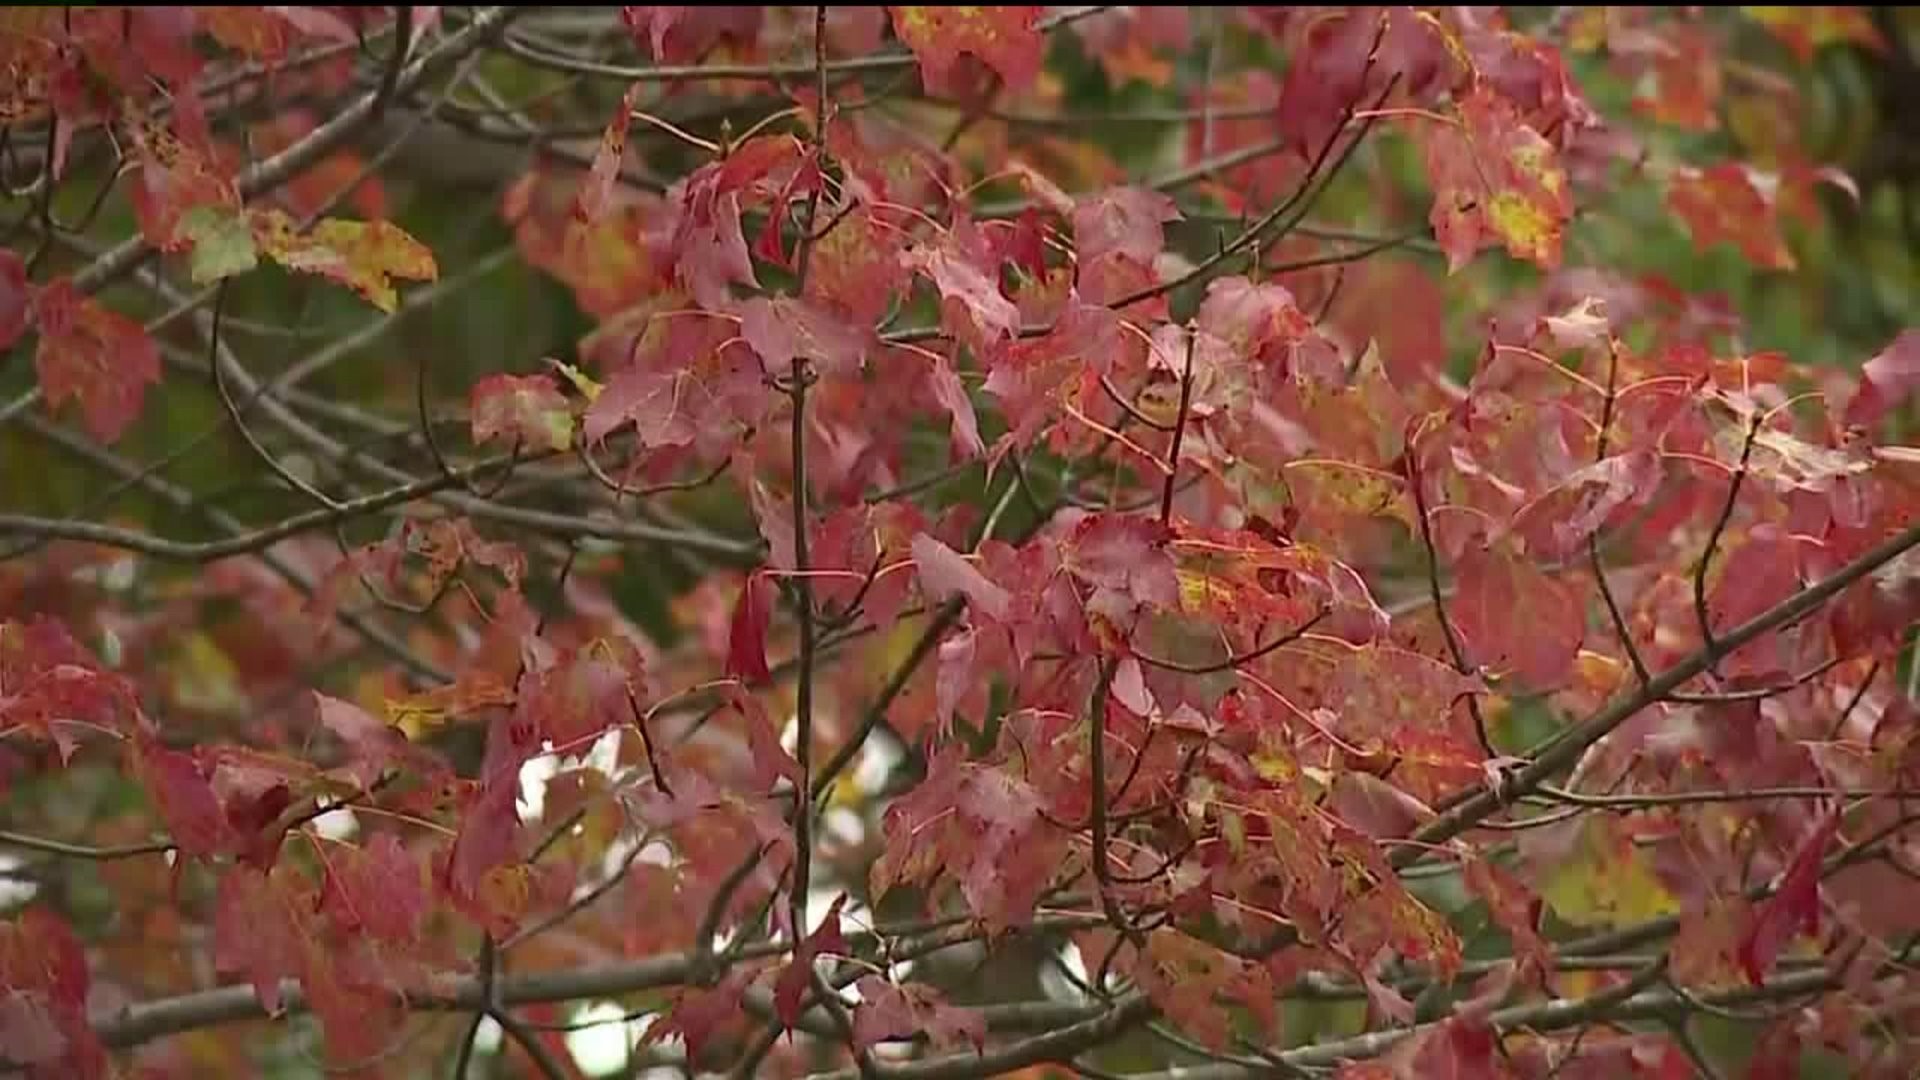 Early Signs of Fall in the Poconos